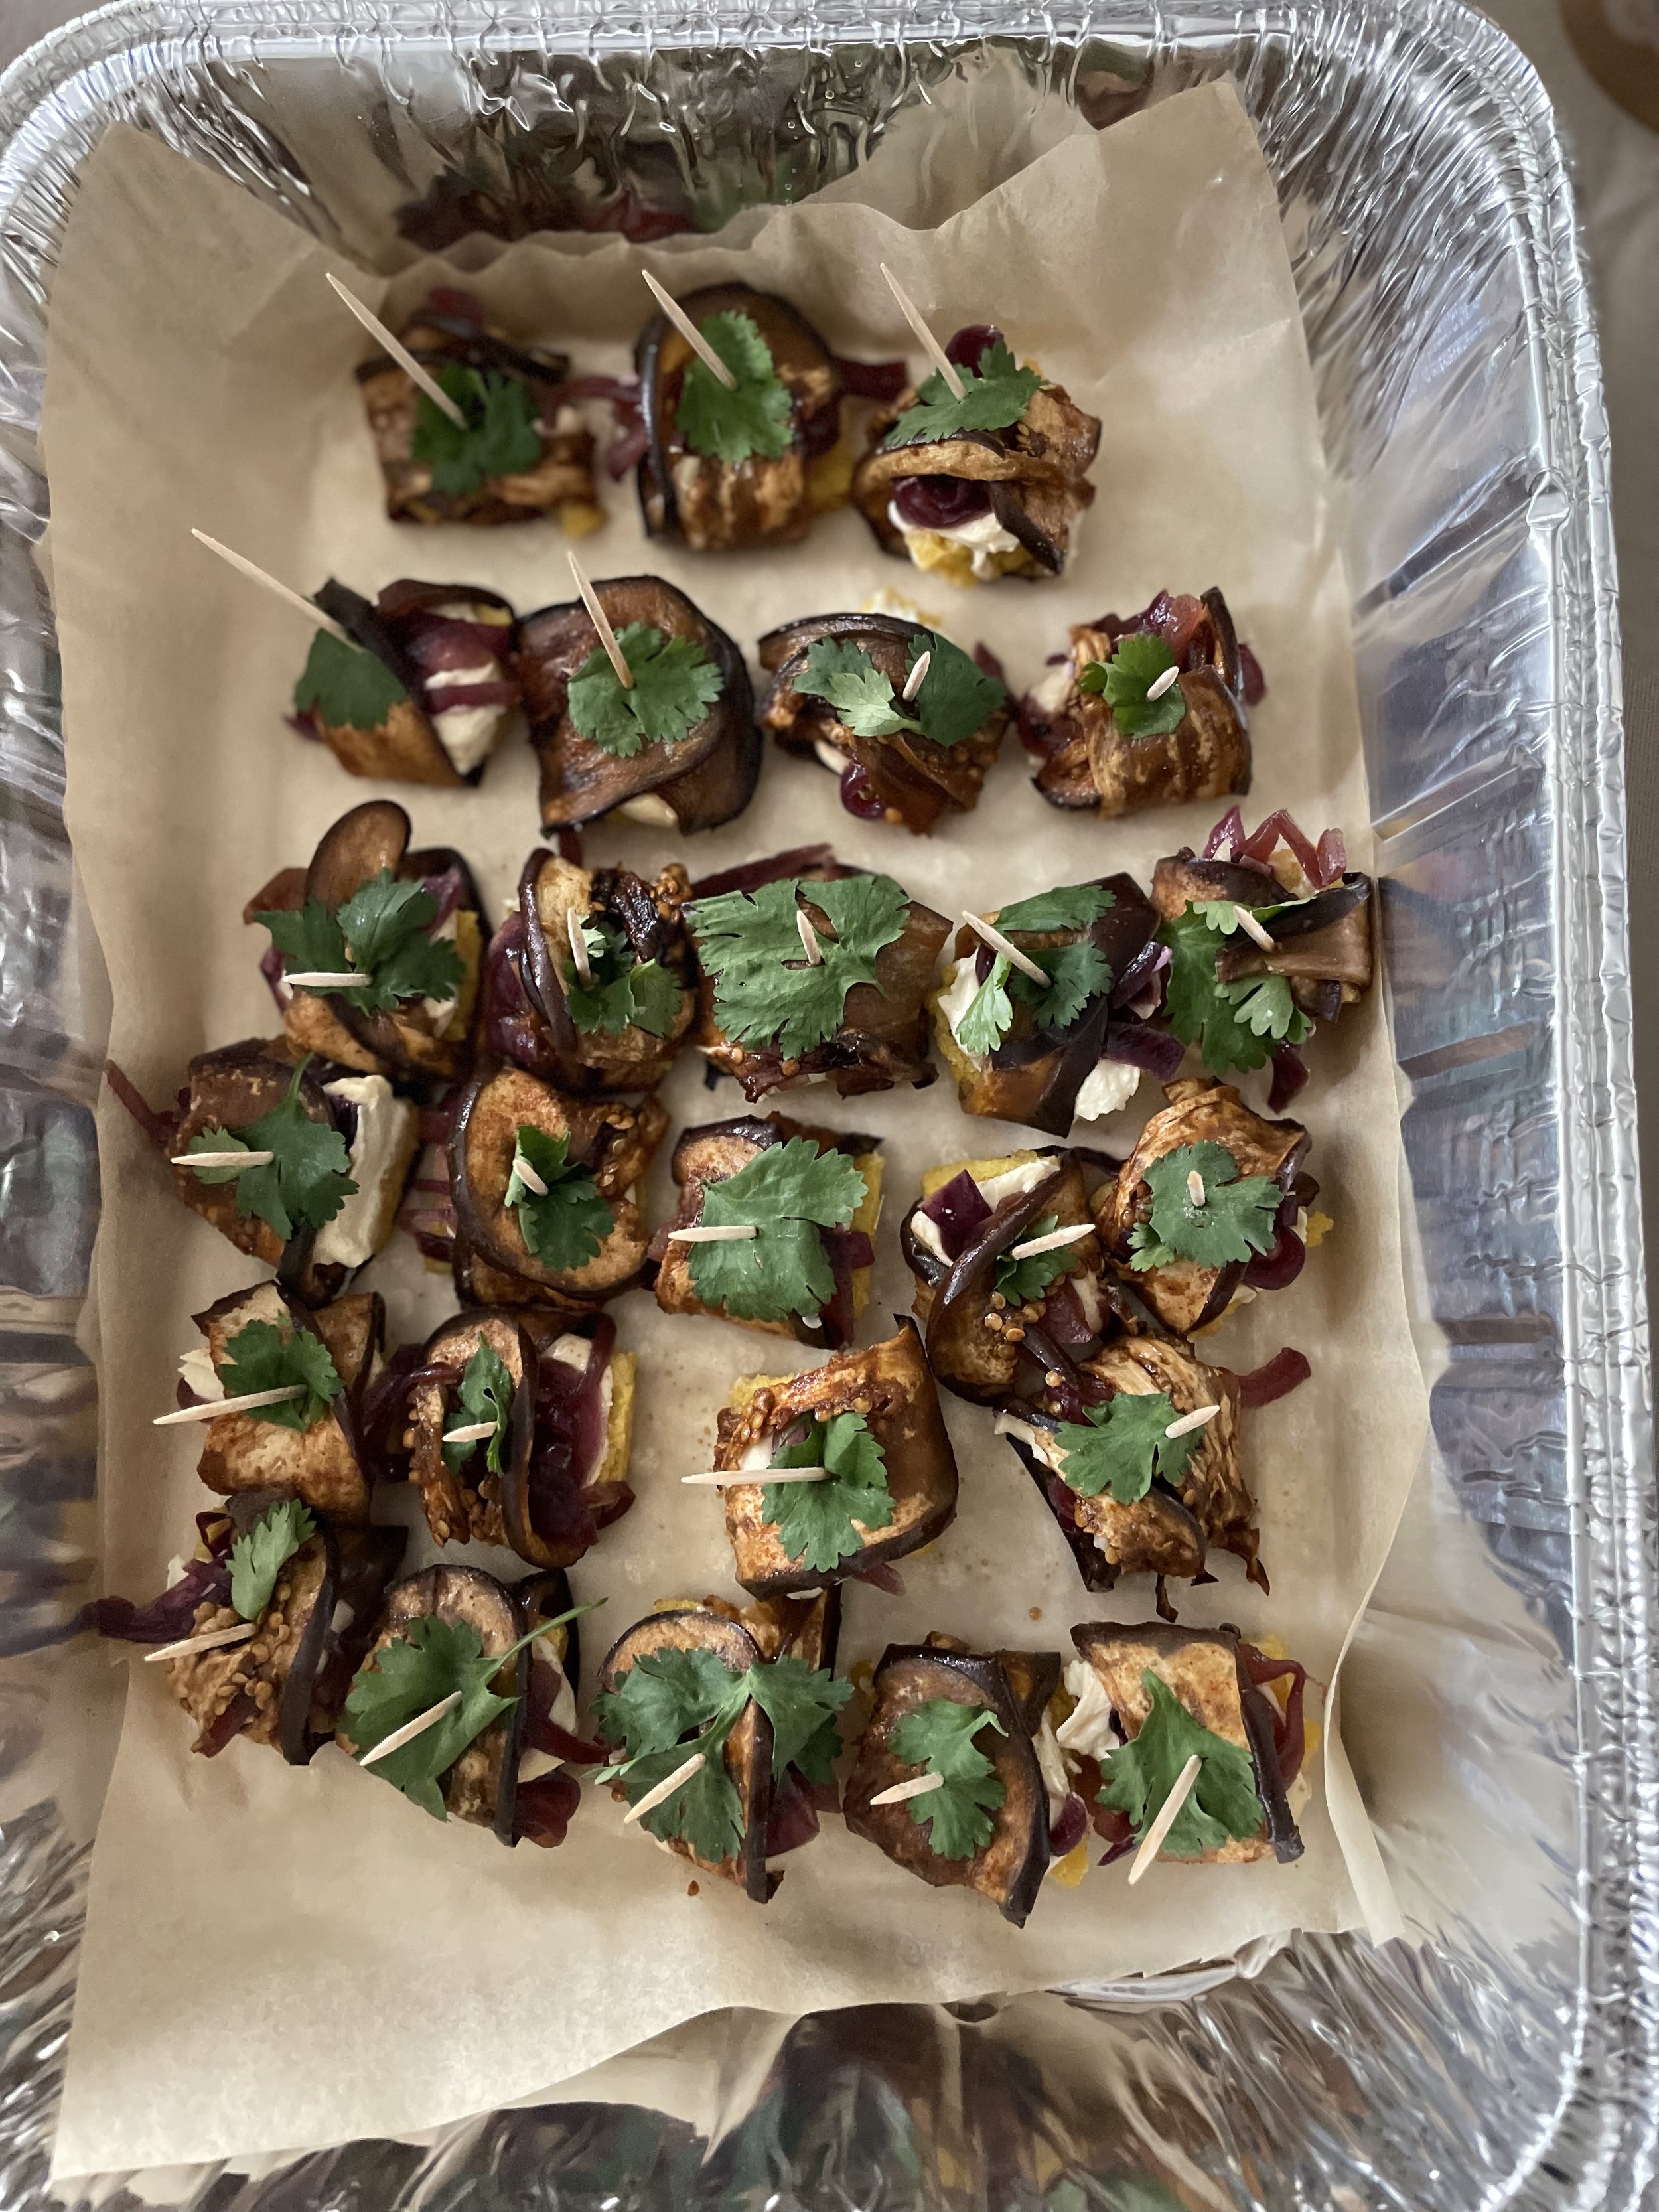 Eggplant "Bacon" Wrapped Dates, Cashew Cheese